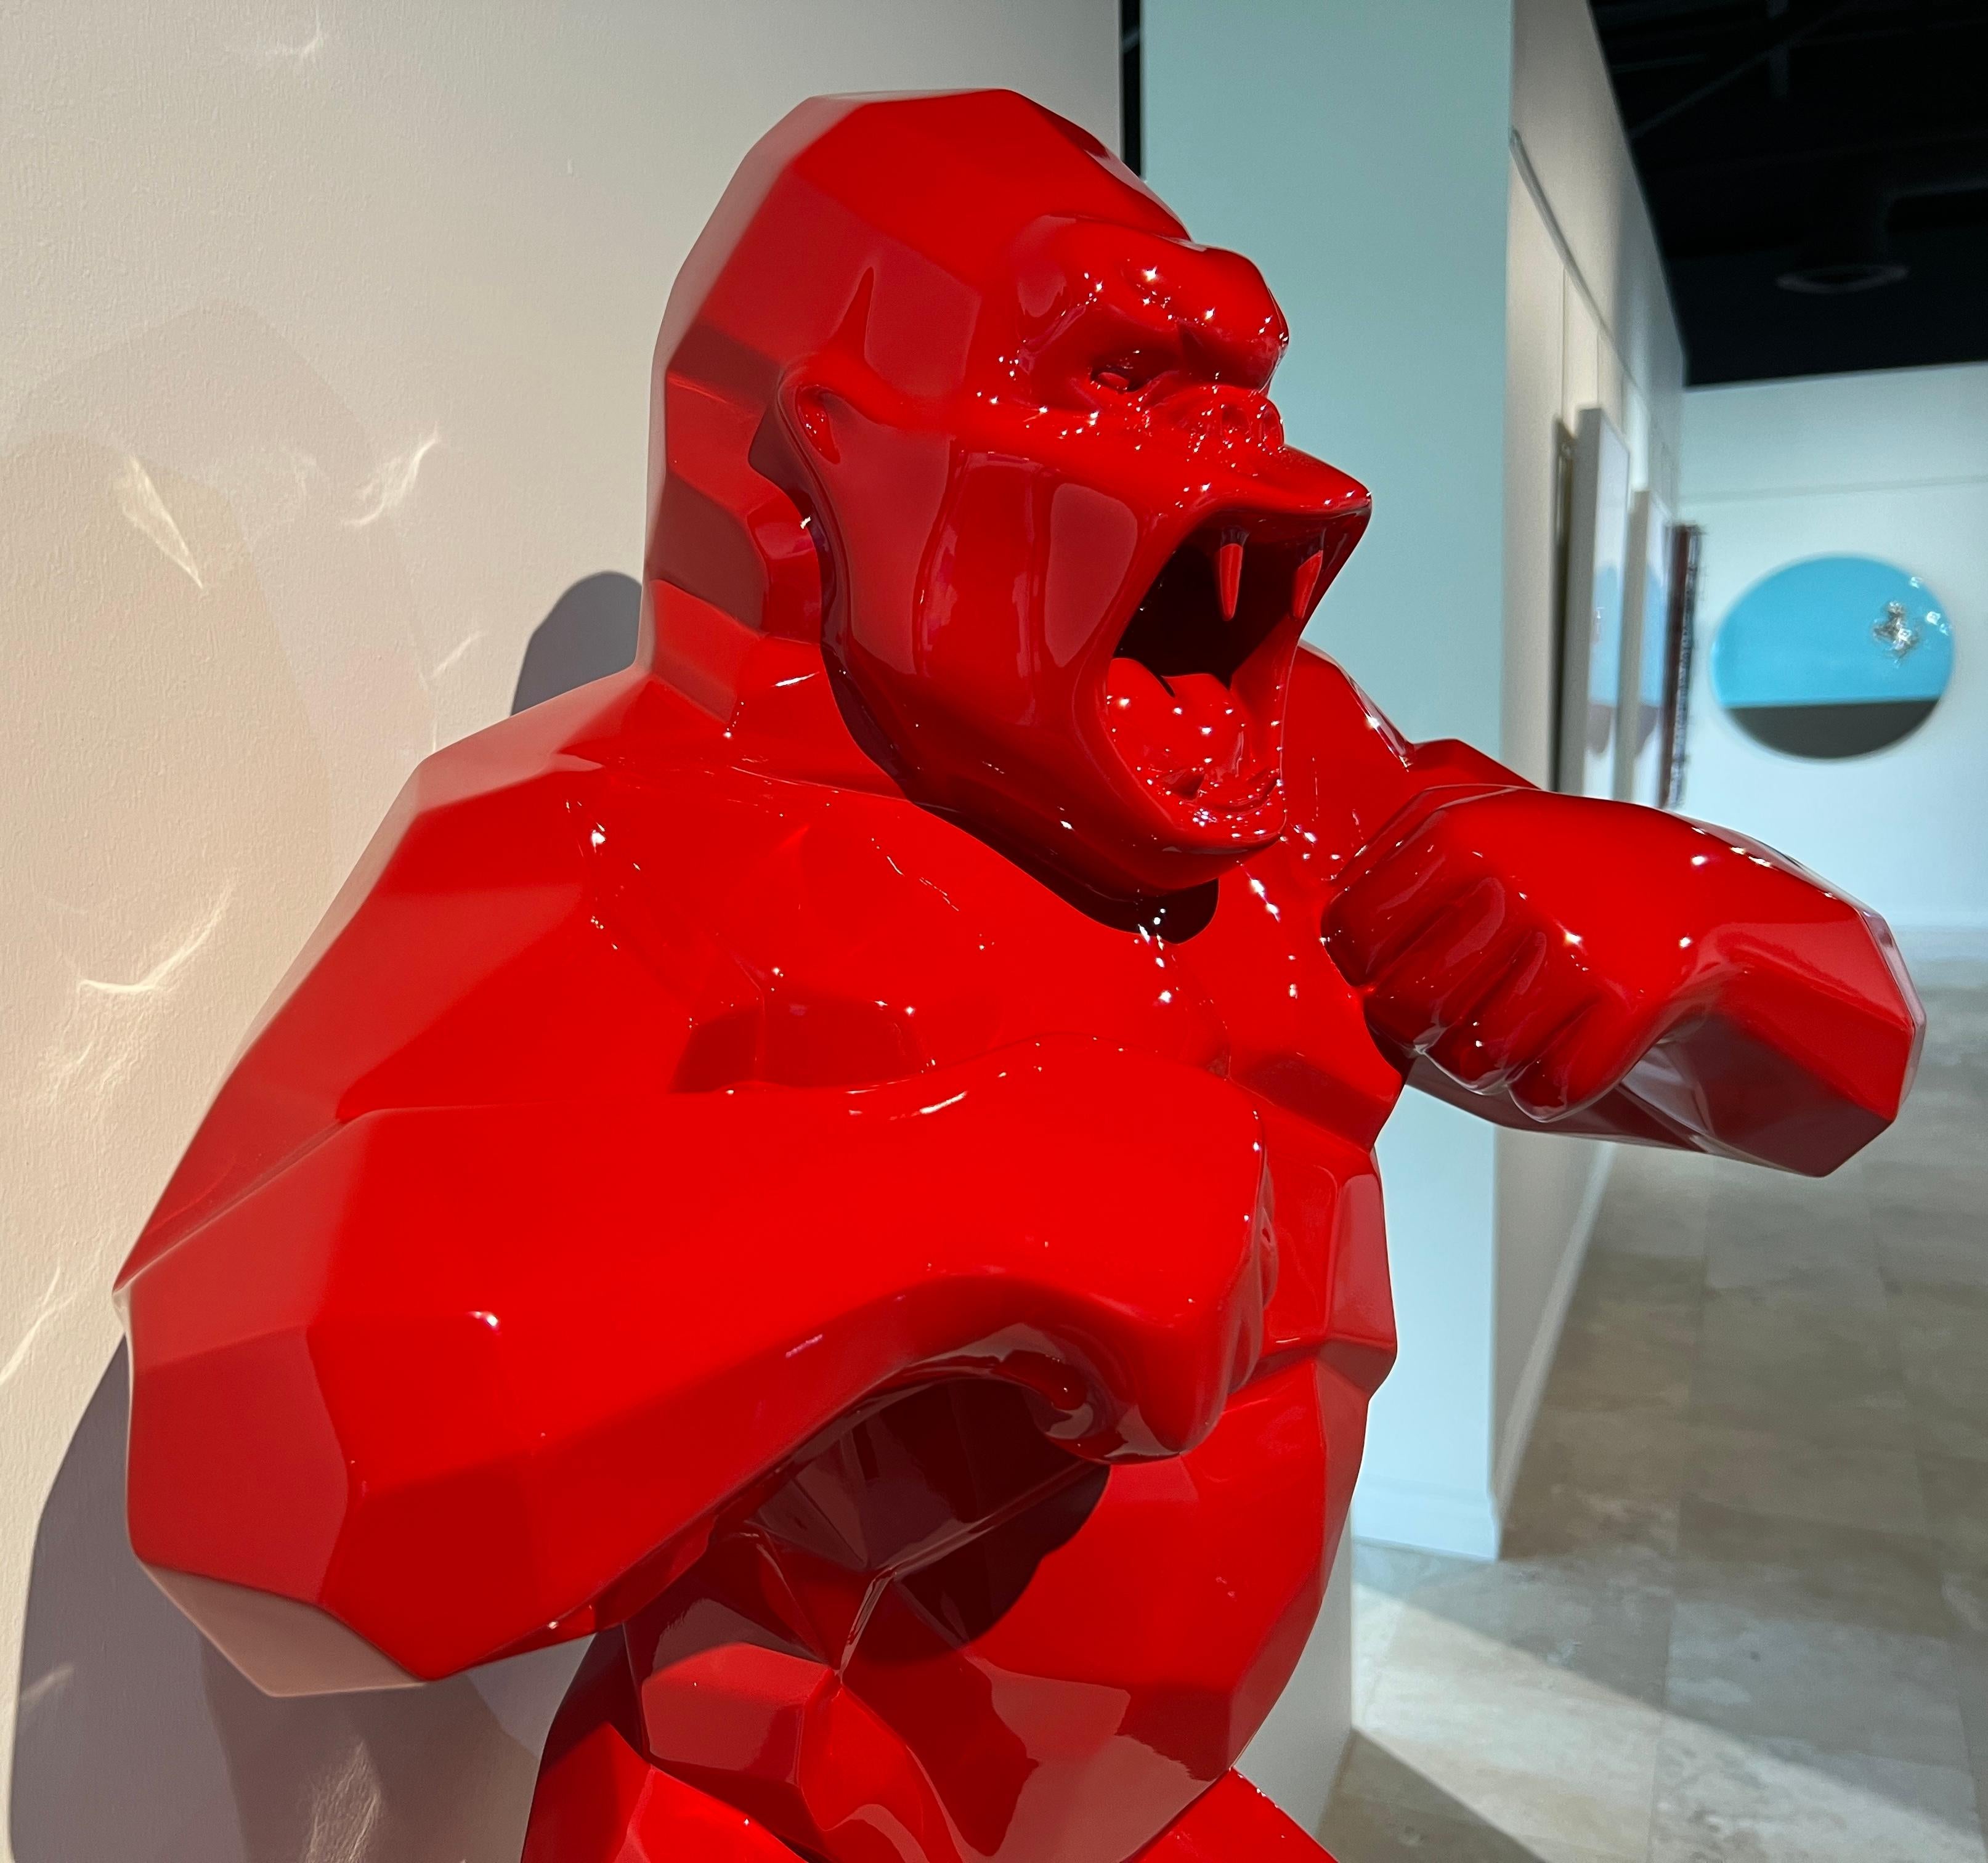 Wild Kong Lip Gloss 80cm 6/8

Richard Orlinski is a French artist born in Paris (France) in 1966. Sculptor since 2004, his work, conceived around the concept “Born Wild” in a style and with contemporary materials available for a large audience,